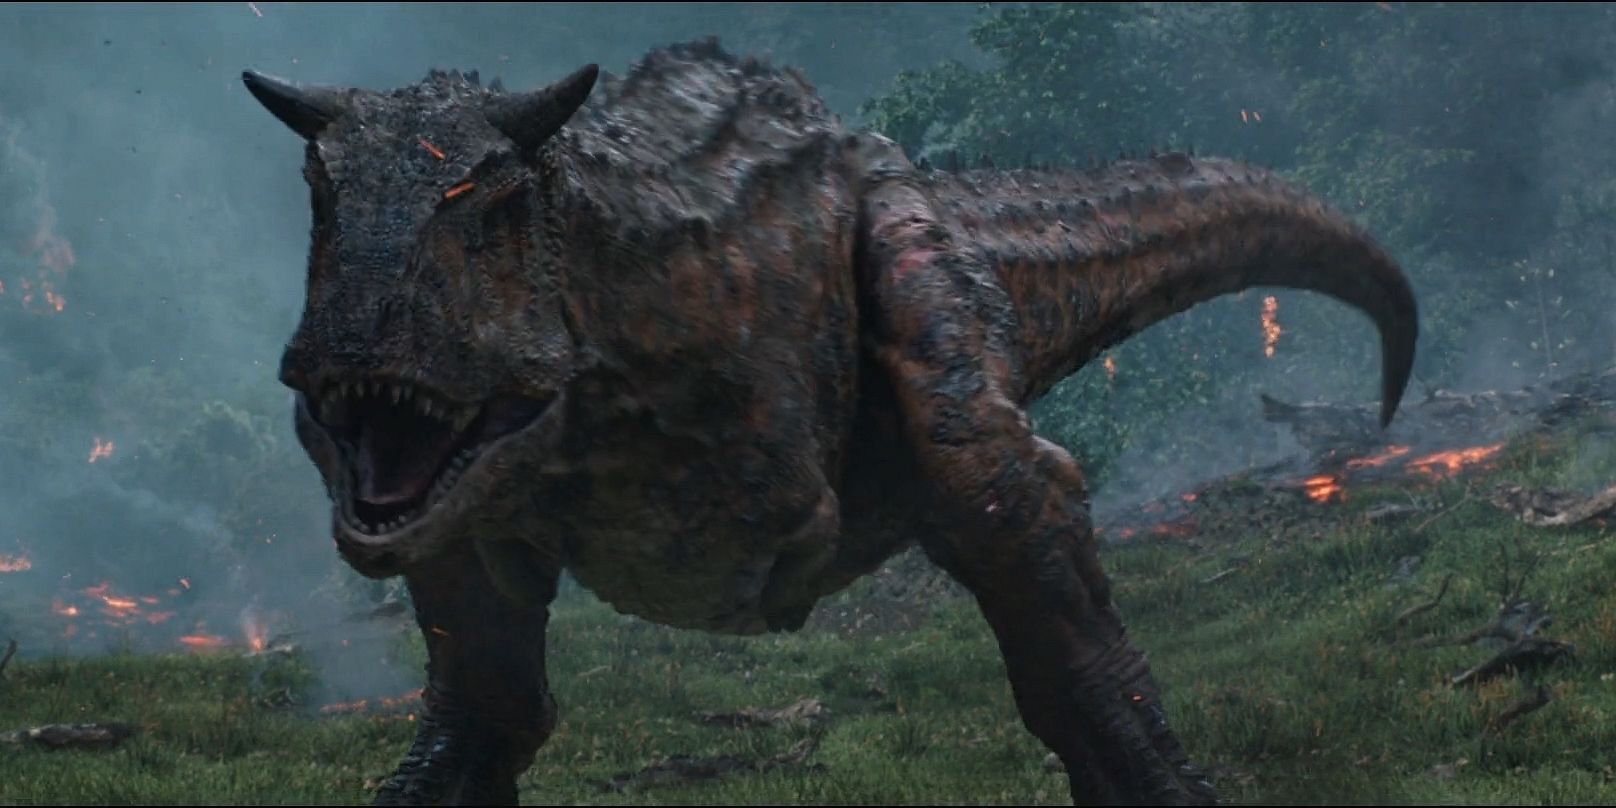 A Carnotaurus prepares to attack with the exploding volcano behind it on Isla Nublar in Jurassic World Fallen Kingdom